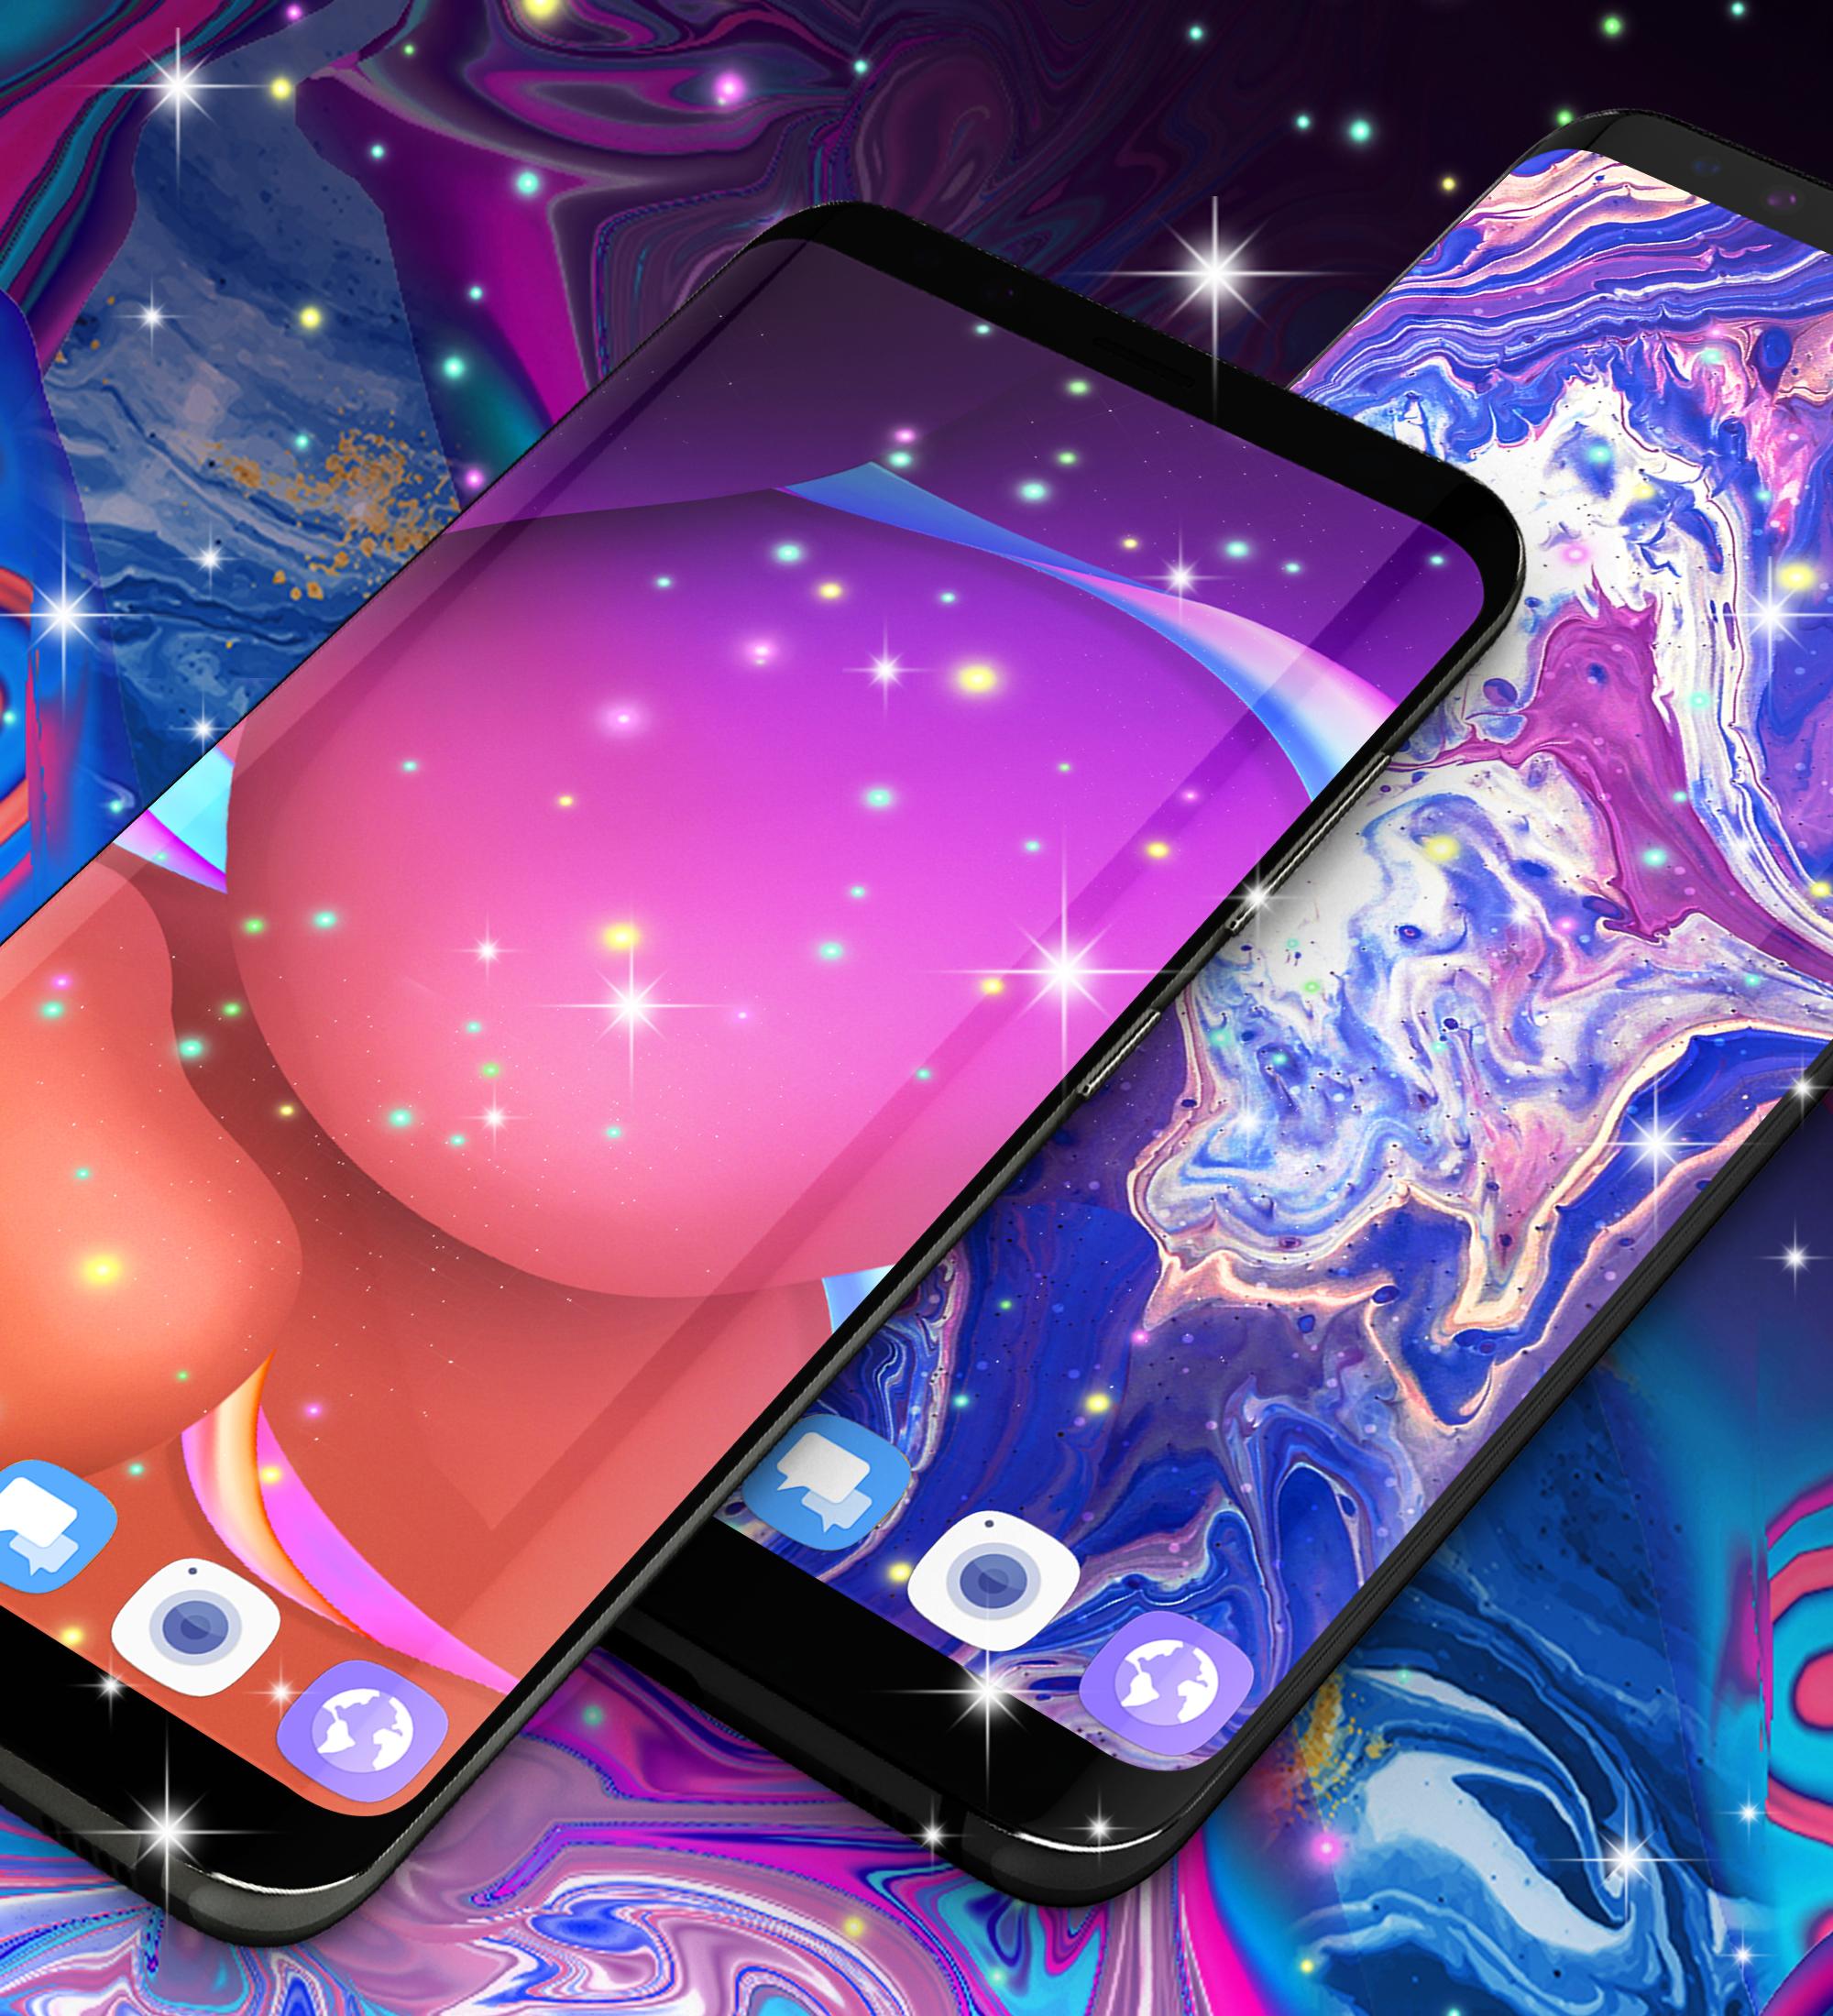 Live wallpaper for Galaxy S10 APK  for Android – Download Live wallpaper  for Galaxy S10 XAPK (APK Bundle) Latest Version from 